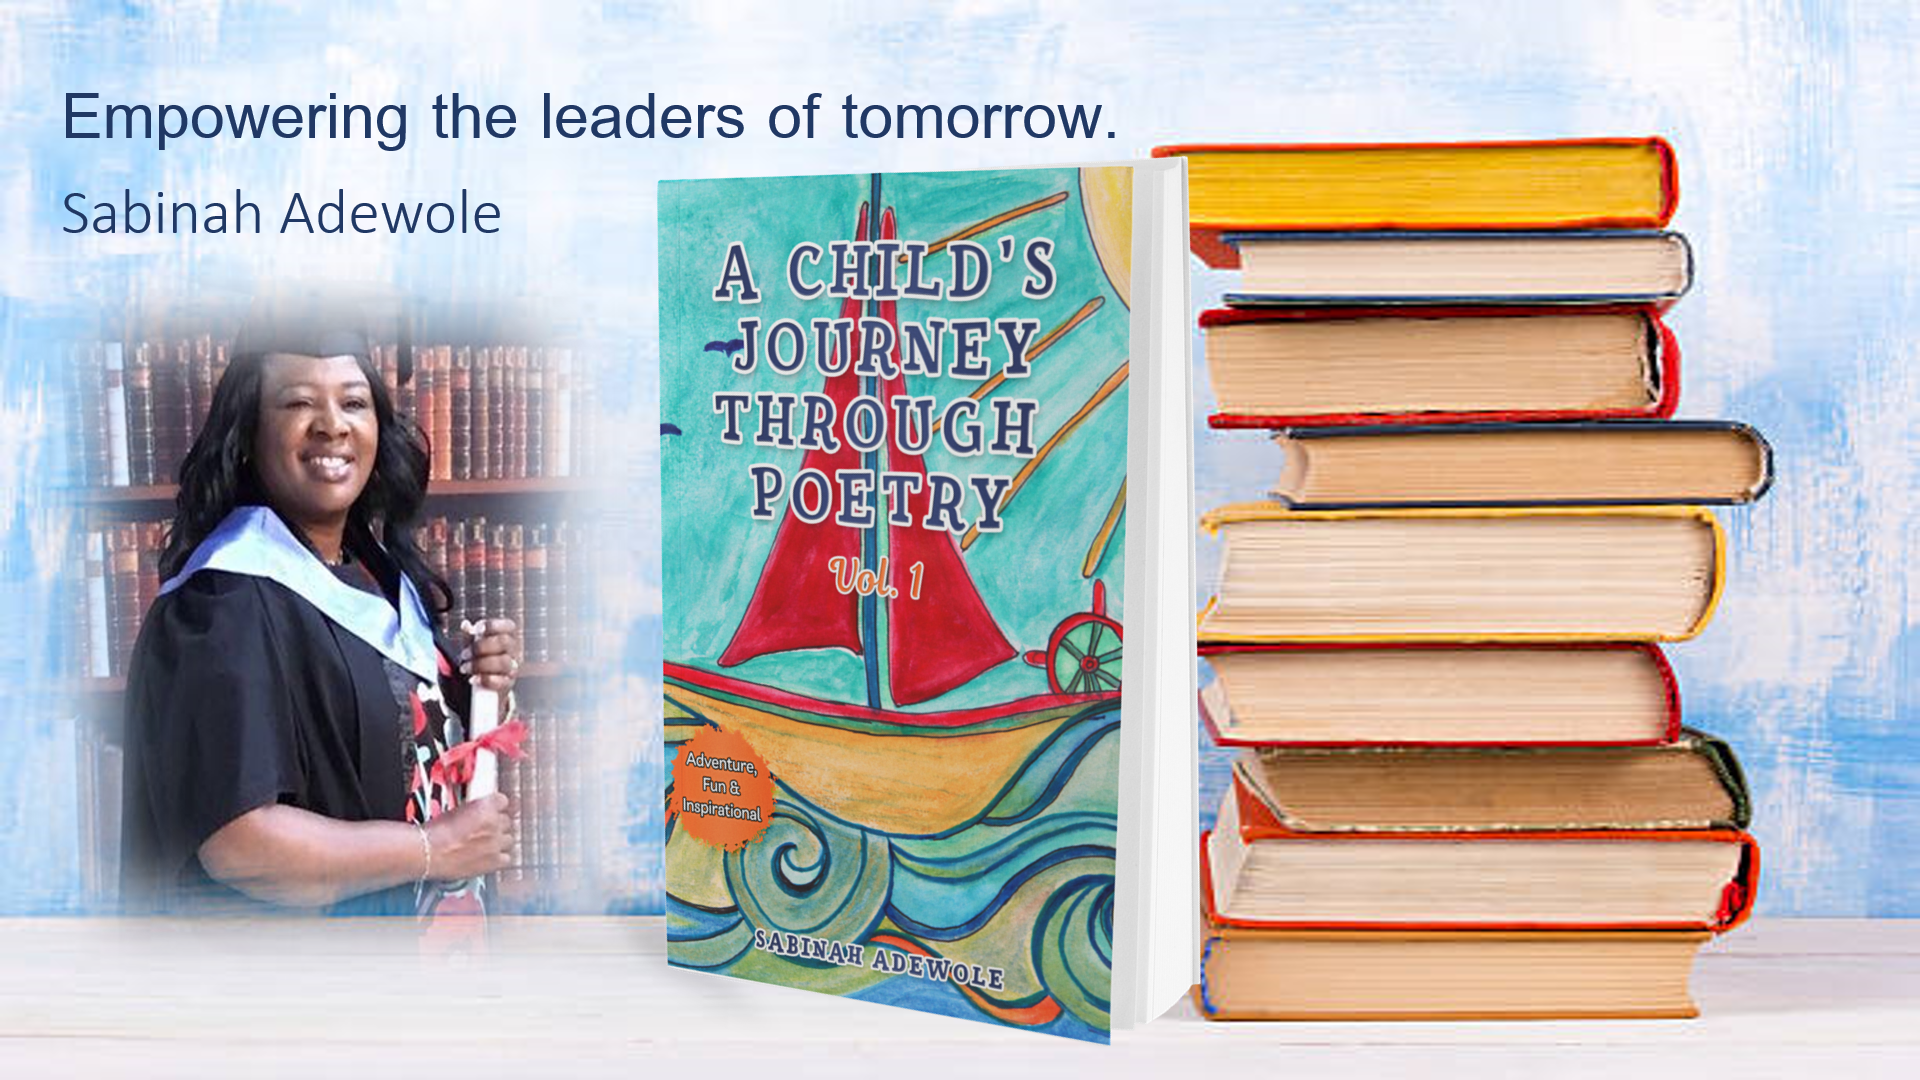 Empowering the Leaders of Tomorrow, Today - Sabinah Adewole’s "A Child’s Journey Through Poetry" Inspires Positive Growth Mindset in an Easy-to-Read Format